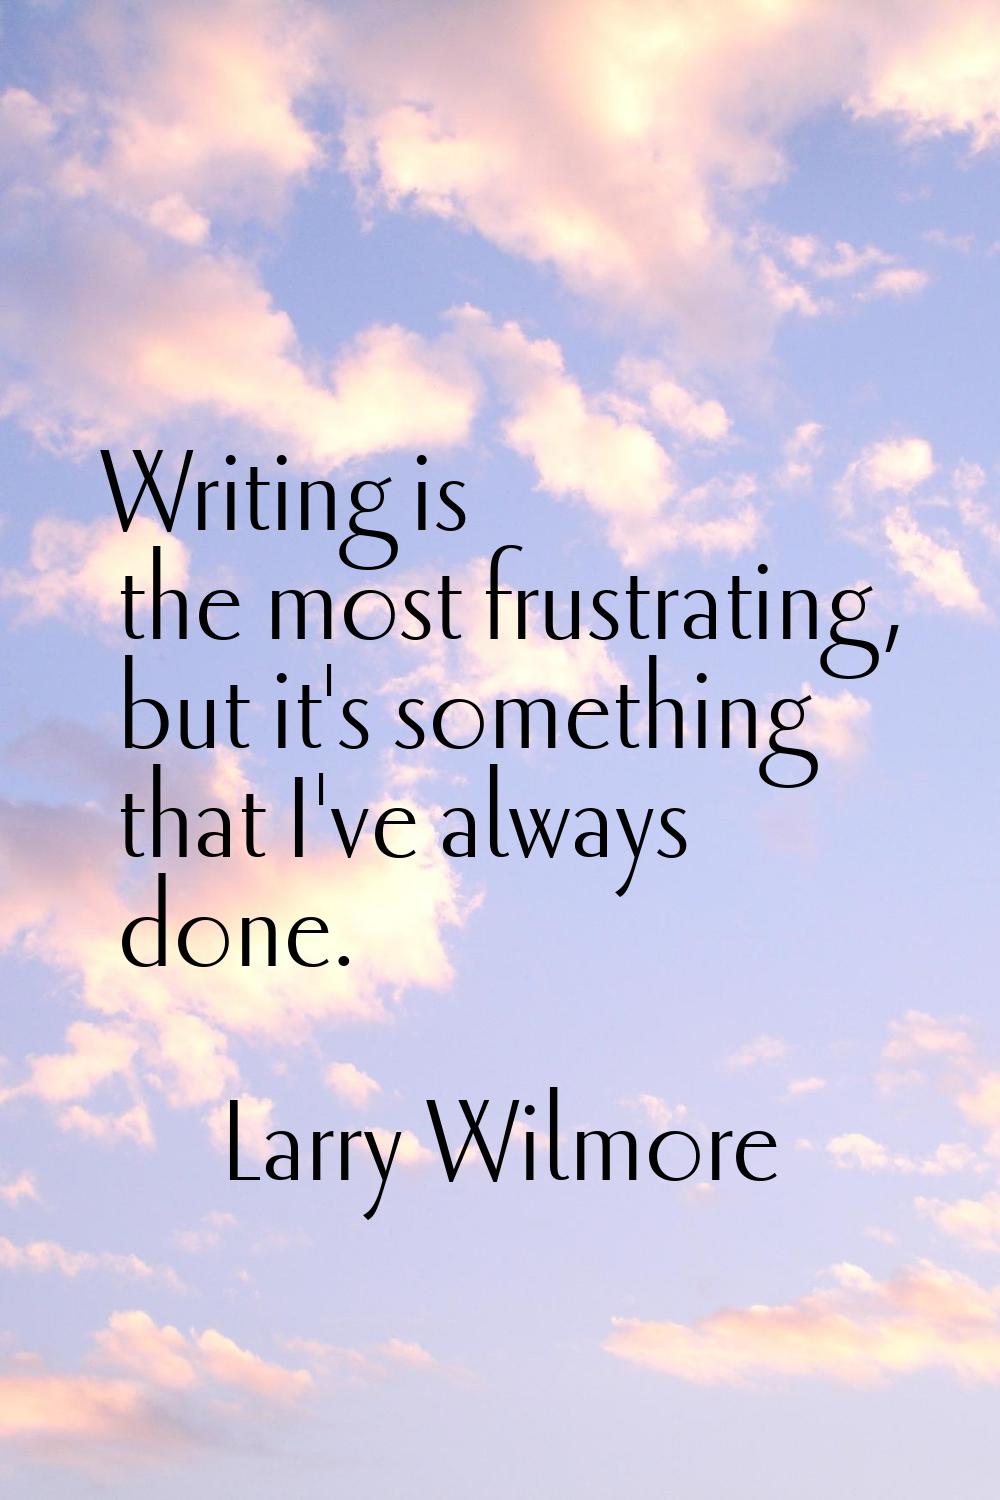 Writing is the most frustrating, but it's something that I've always done.